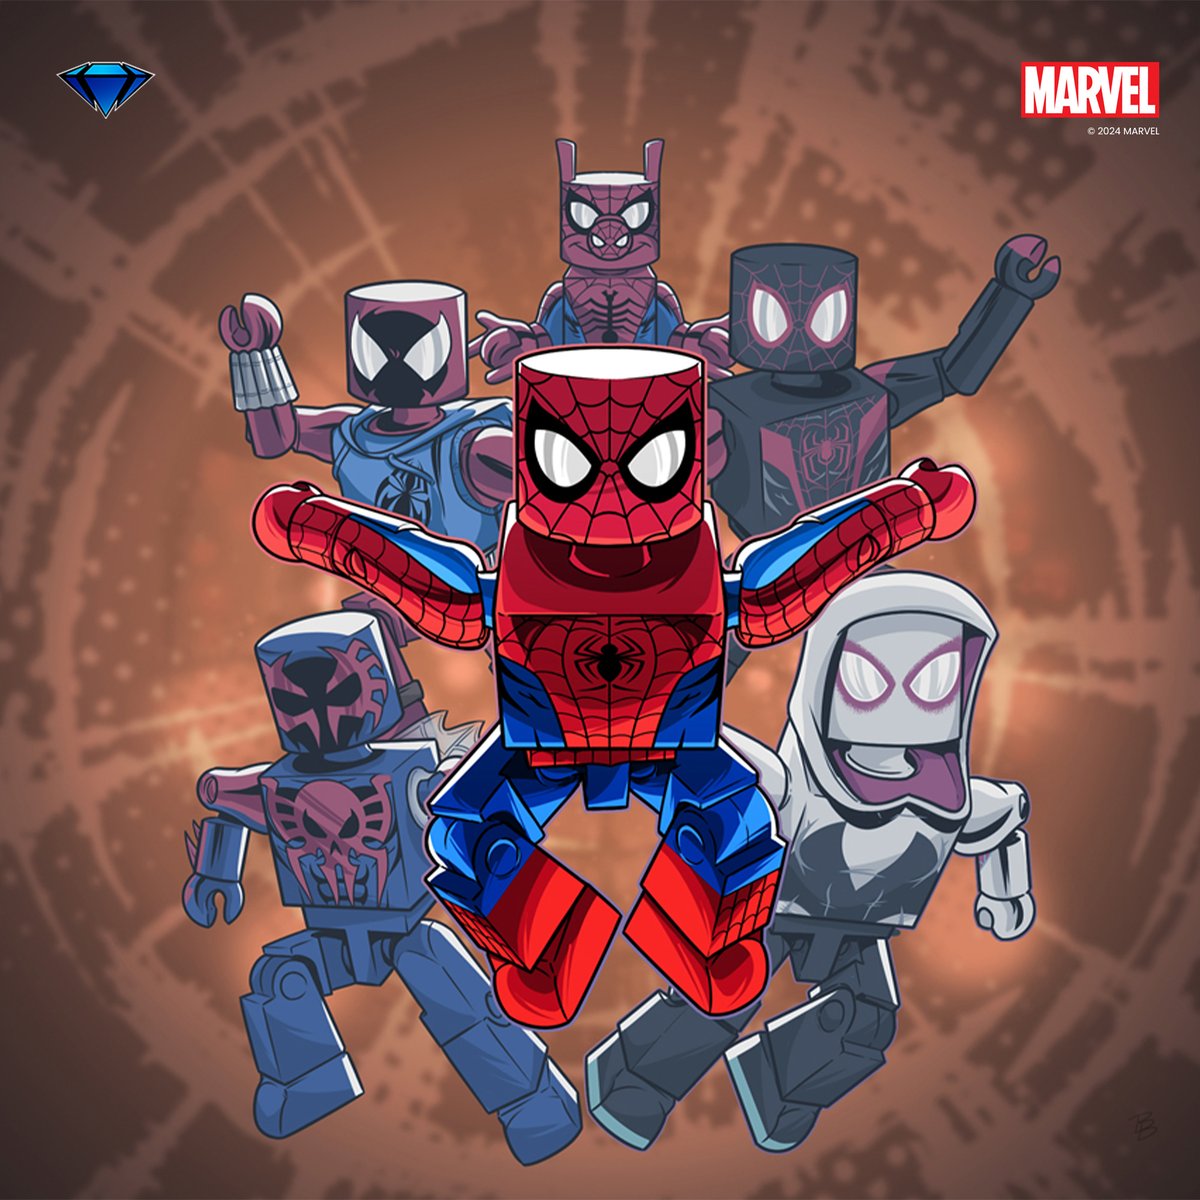 This deluxe minimates set gives you a web of infinite Spider-variants! Marvel's Spider-Man (Spider-Verse) Deluxe Minimates Box Set packaging art designed by Barry Bradfield. bit.ly/SpiderVerseMM #Marvel #SpiderMan #Minimates #CollectDST #DiamondSelectToys